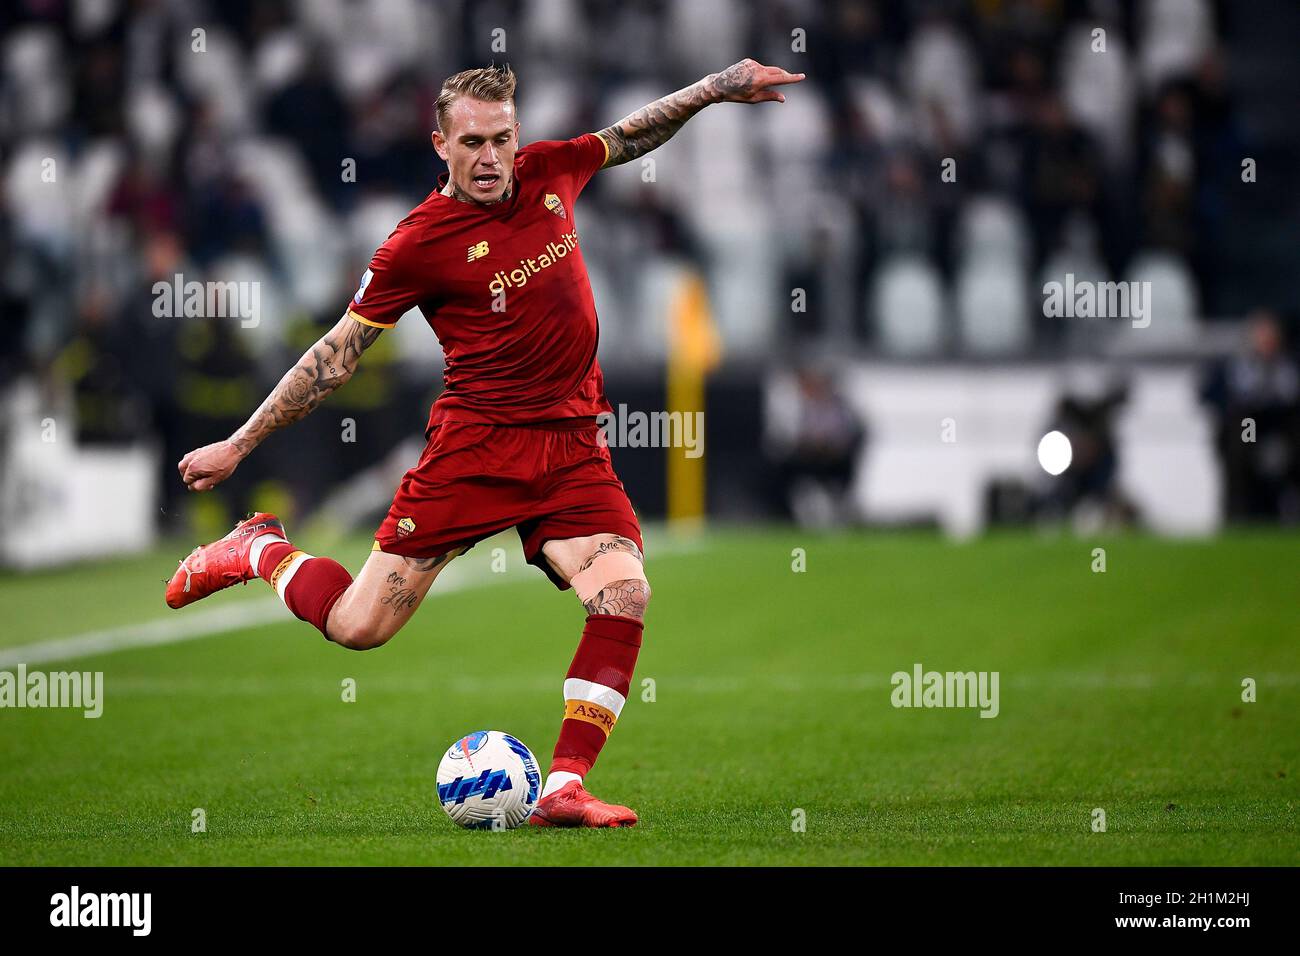 Turin, Italy. 17 October 2021. Rick Karsdorp of AS Roma in action during the Serie A football match between Juventus FC and AS Roma. Credit: Nicolò Campo/Alamy Live News Stock Photo